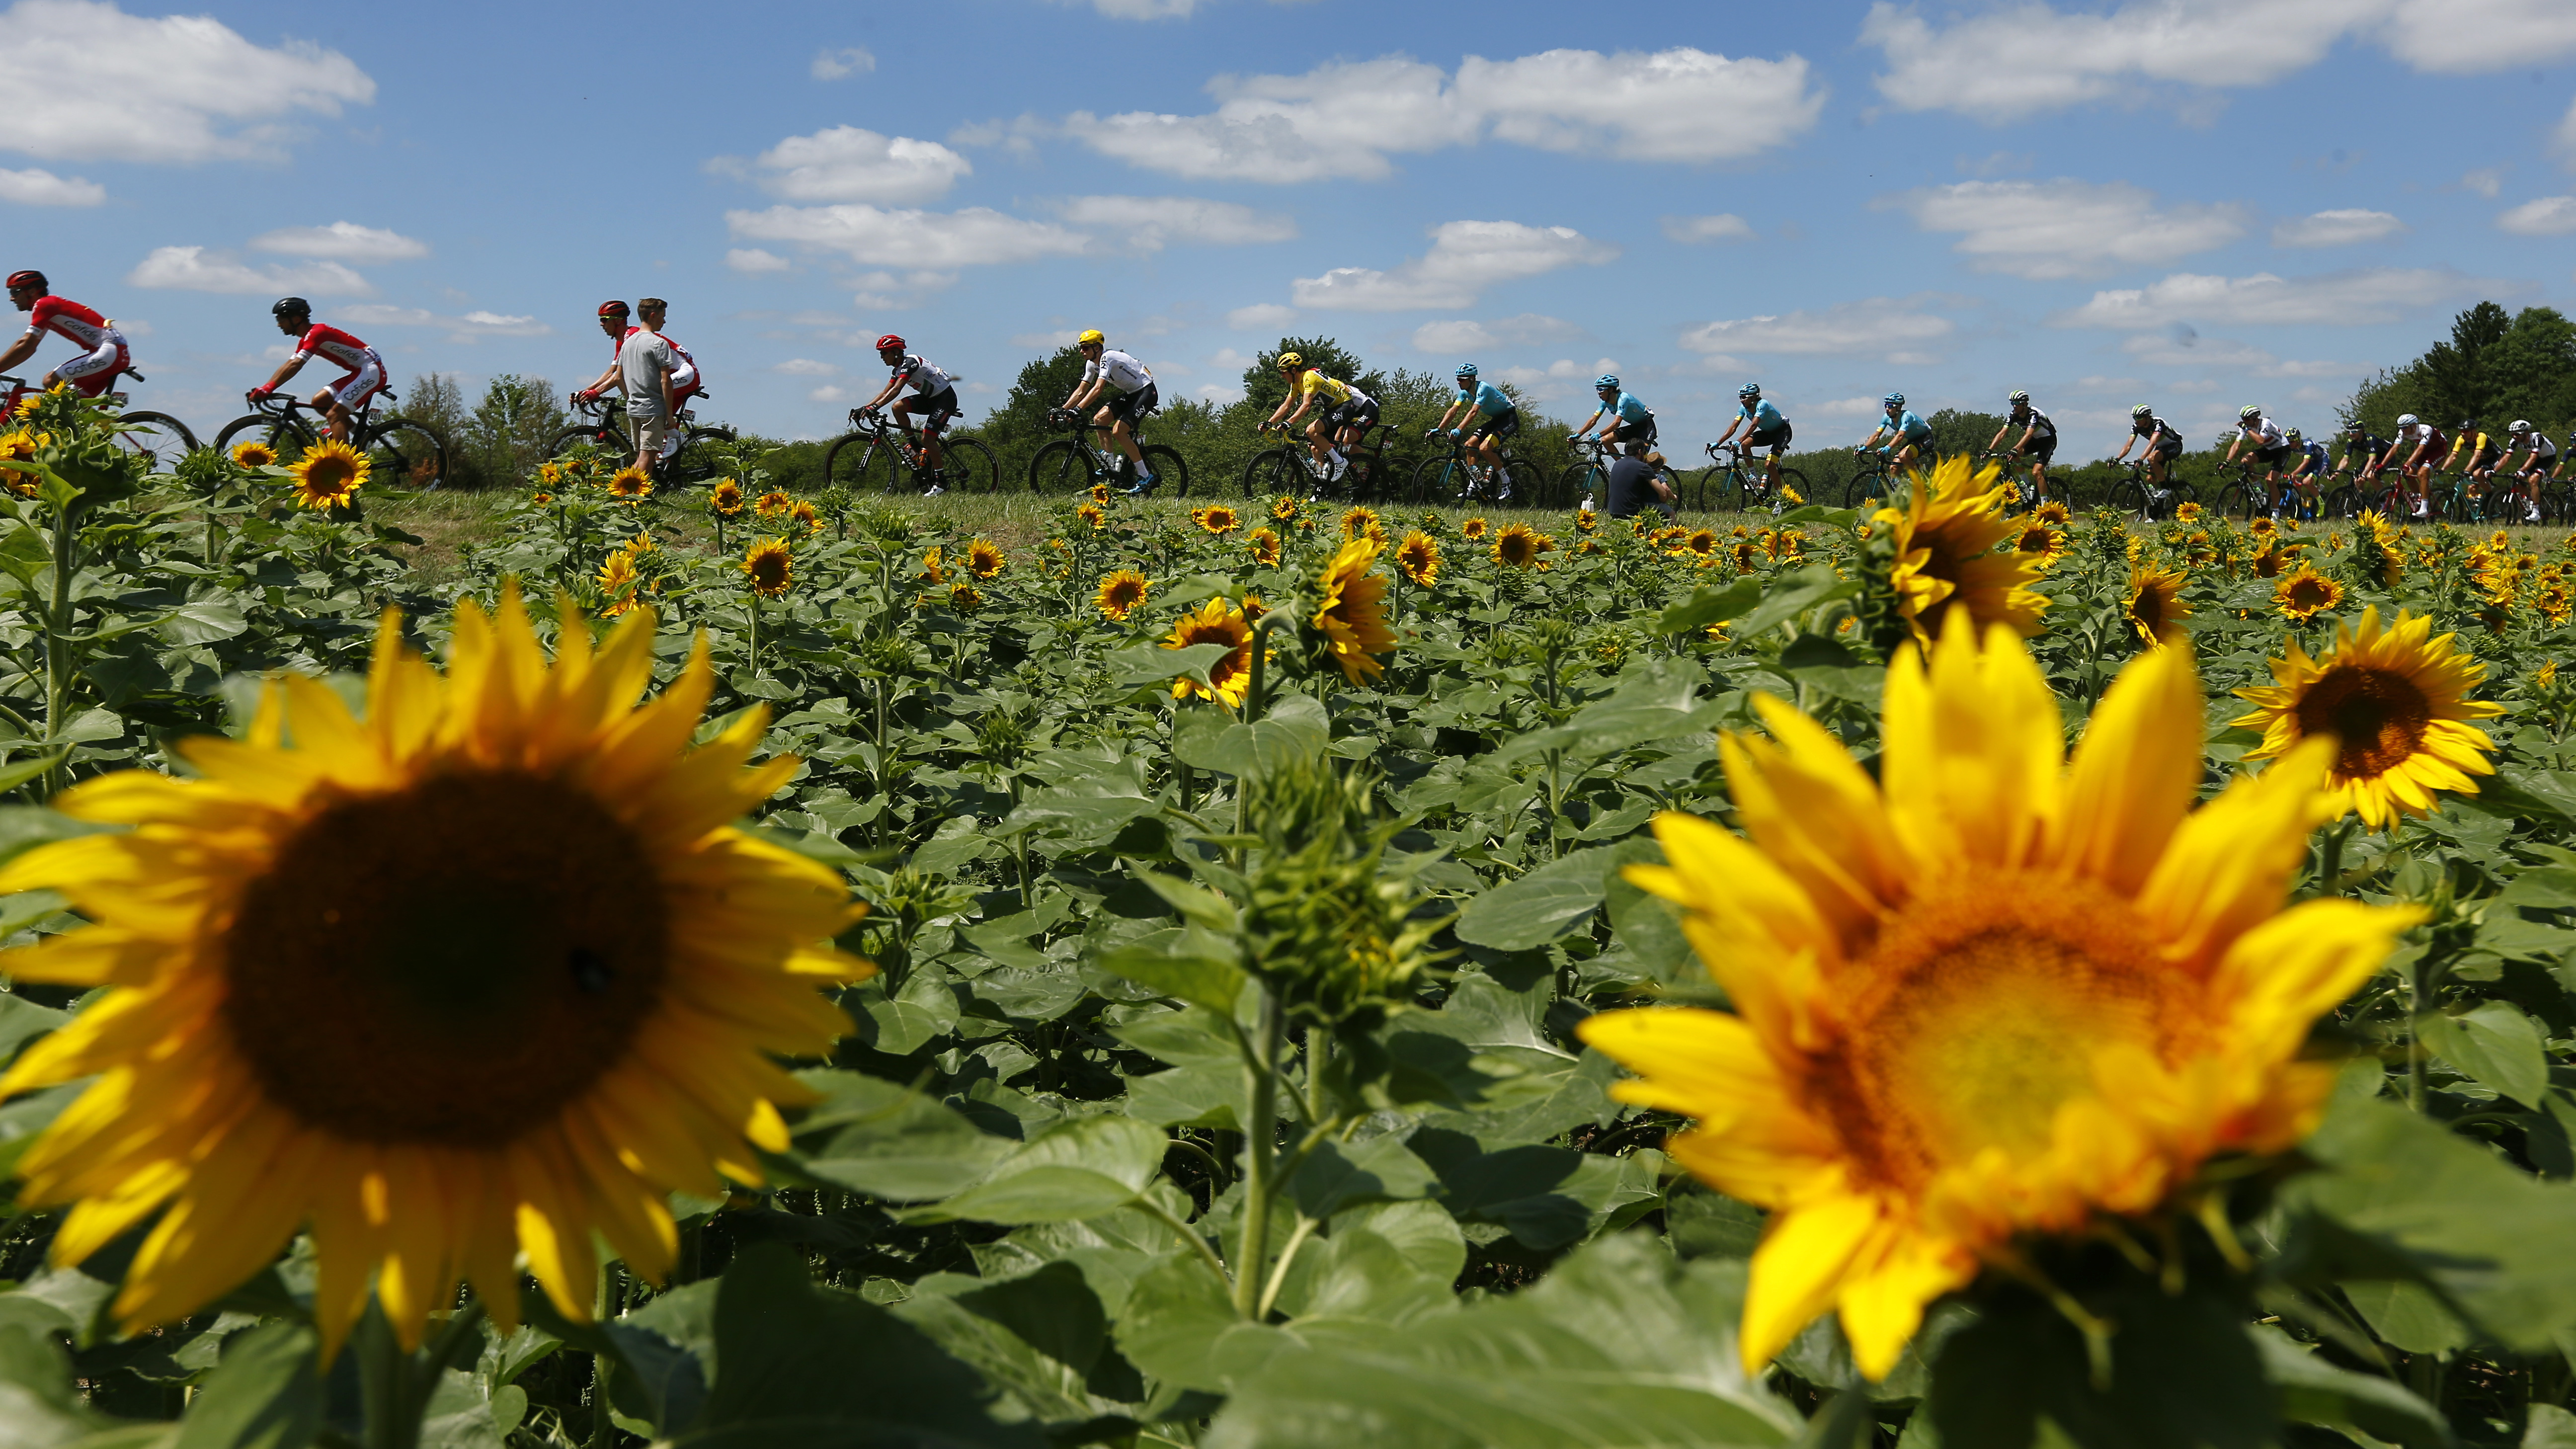 The pack with Britain's Geraint Thomas, wearing the overall leader's yellow jersey, center, passes a field of sunflowers during the fourth stage of the Tour de France cycling race over 207.5 kilometers (129 miles) with start in Mondorf-les-Bains, Luxembourg, and finish in Vittel, France, Tuesday, July 4, 2017. (AP Photo/Peter Dejong)